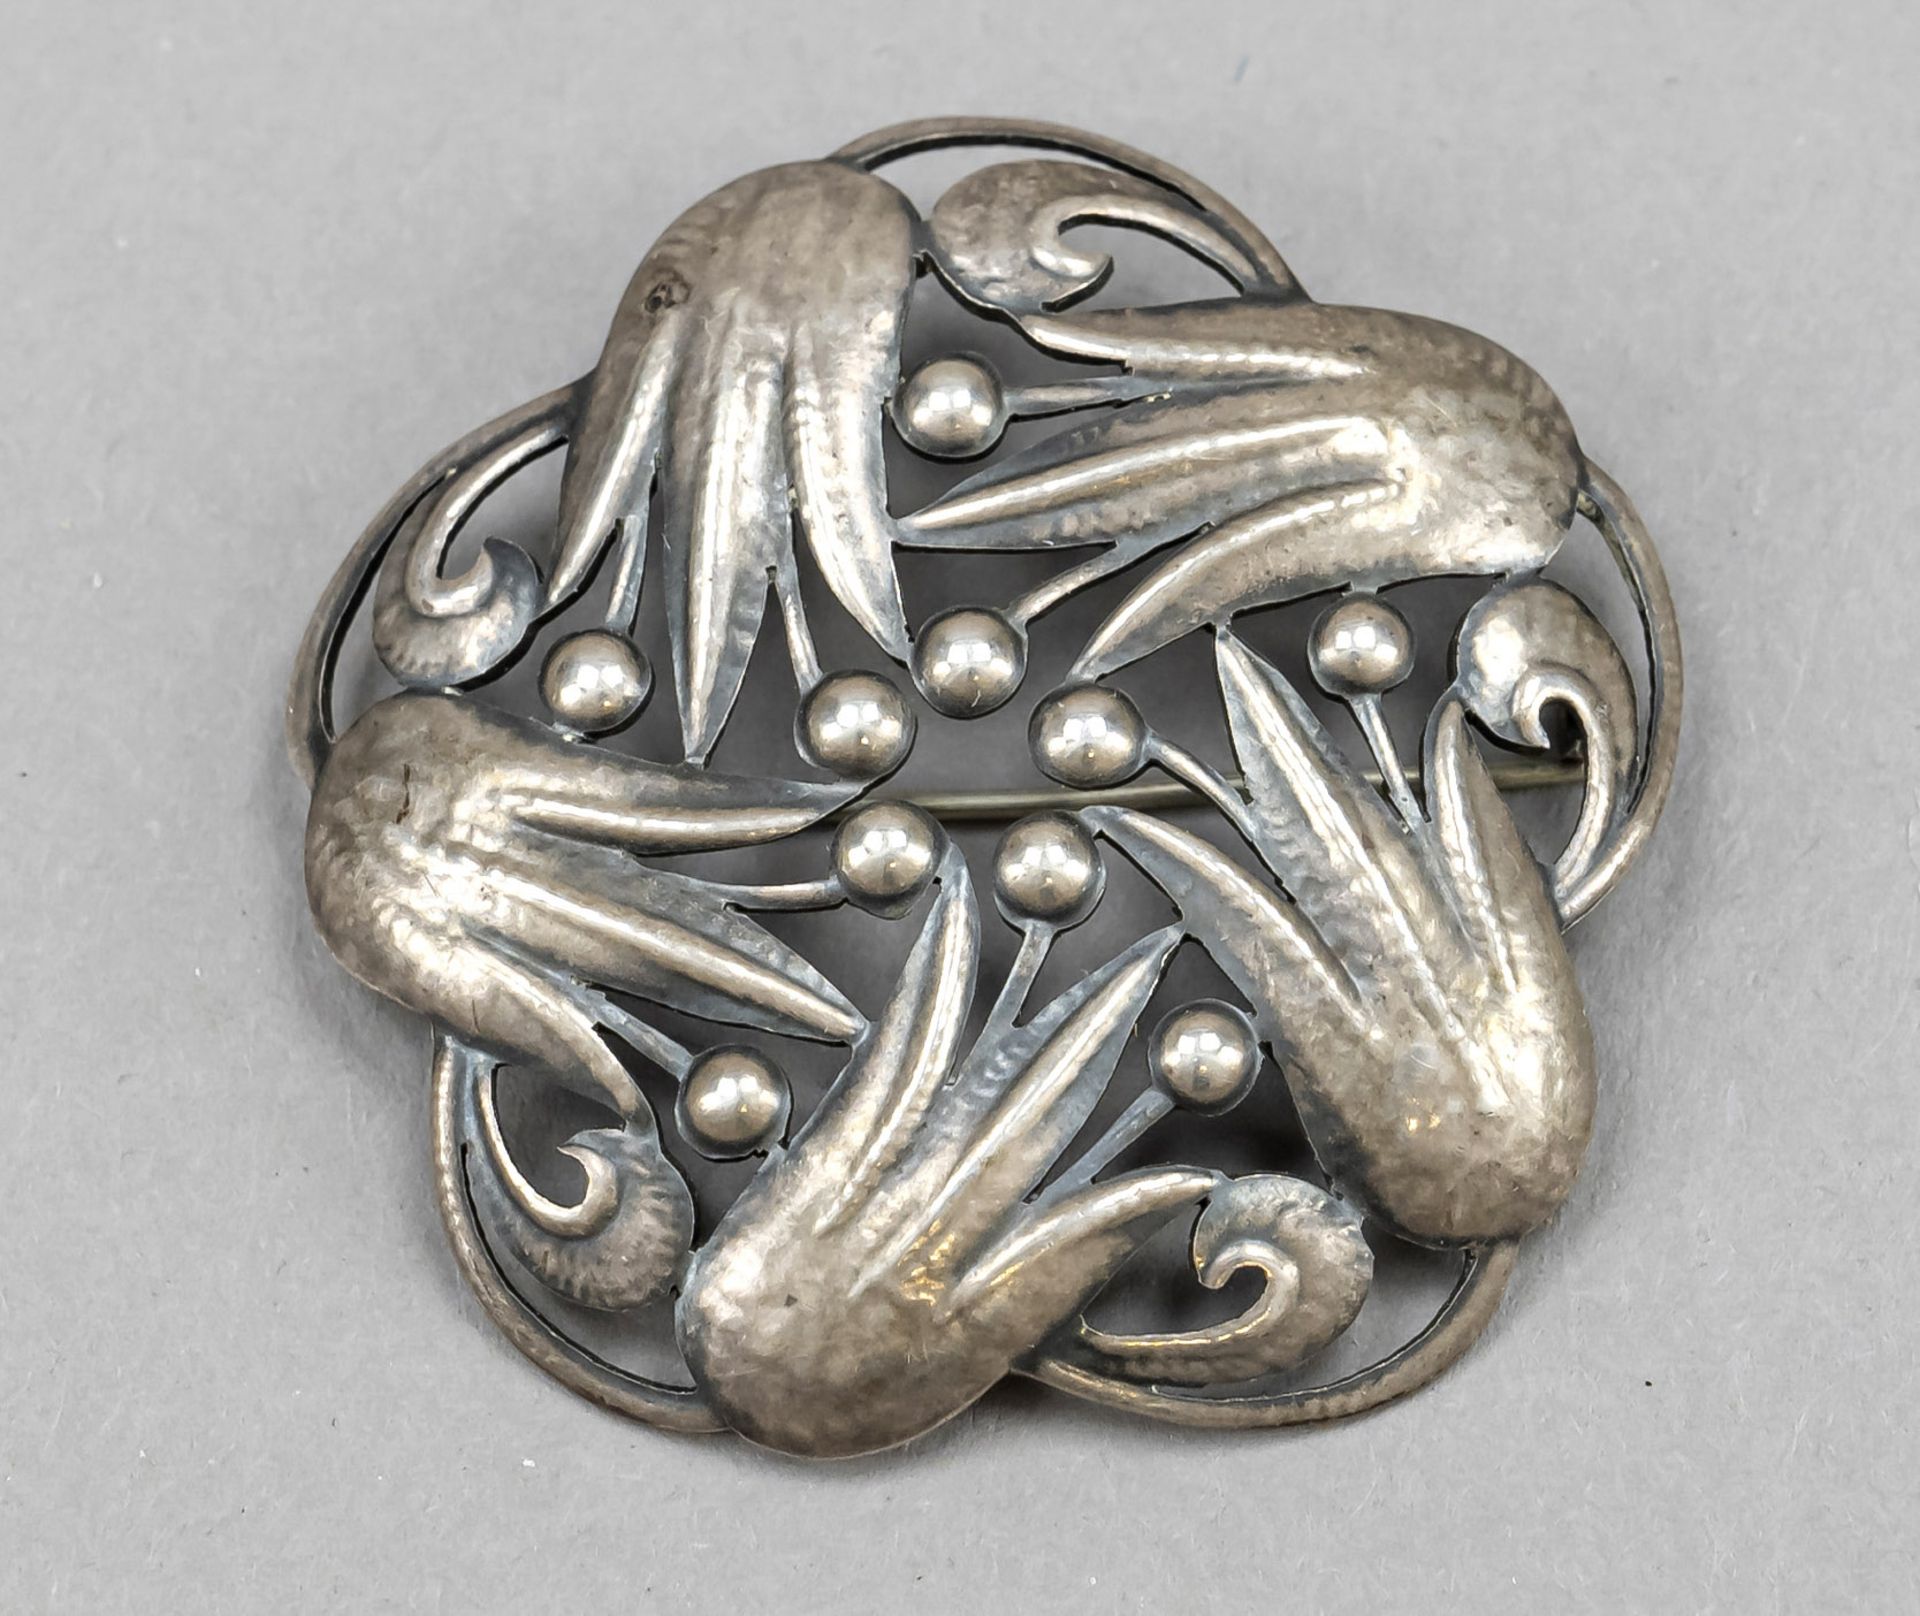 Brooch, German, 20th century, silver 800/000, flower shape, open-worked, with floral relief